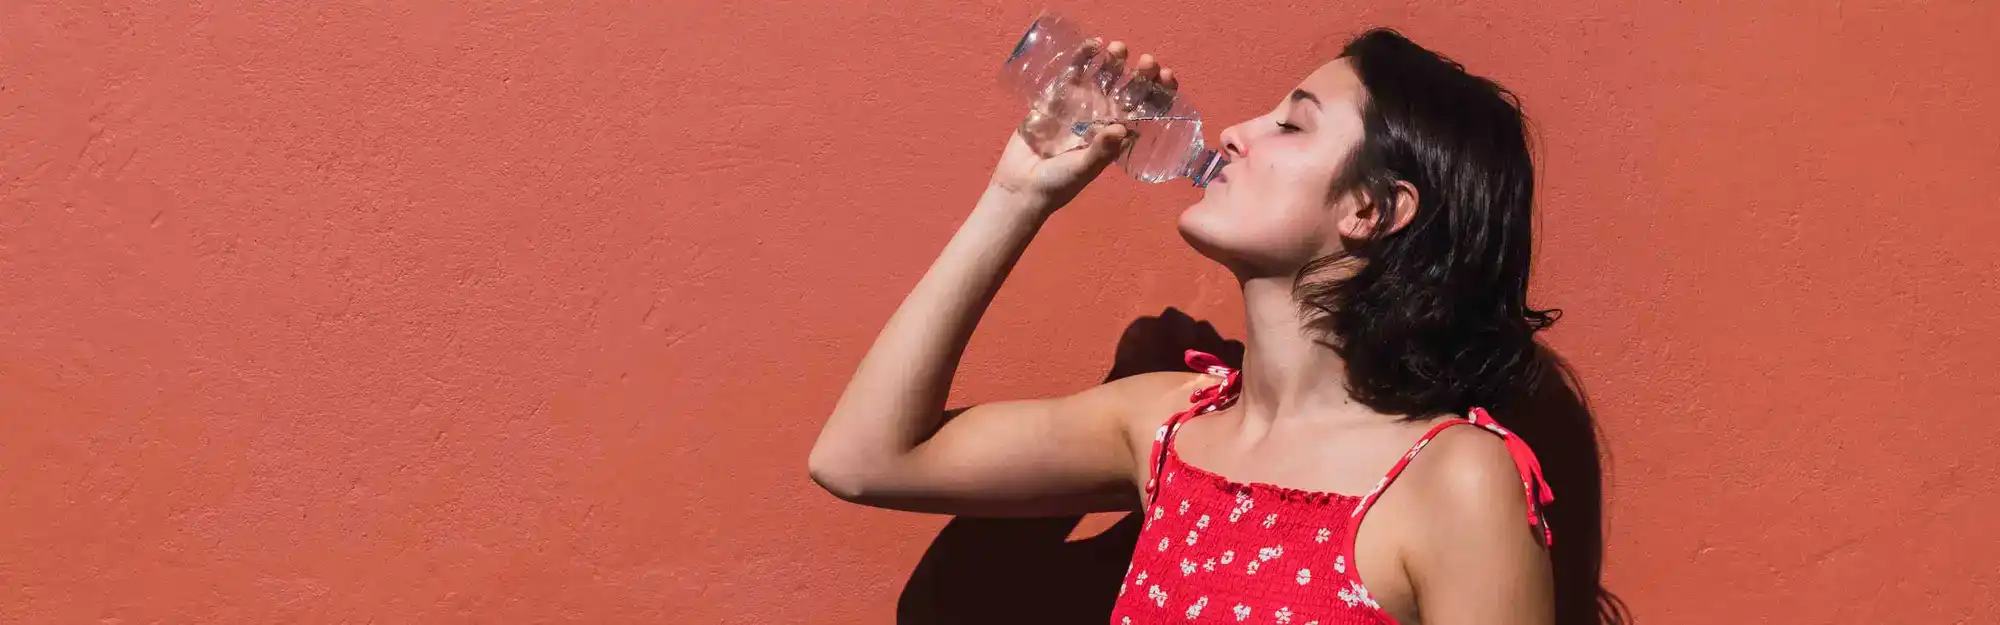 How are headaches and dehydration related?